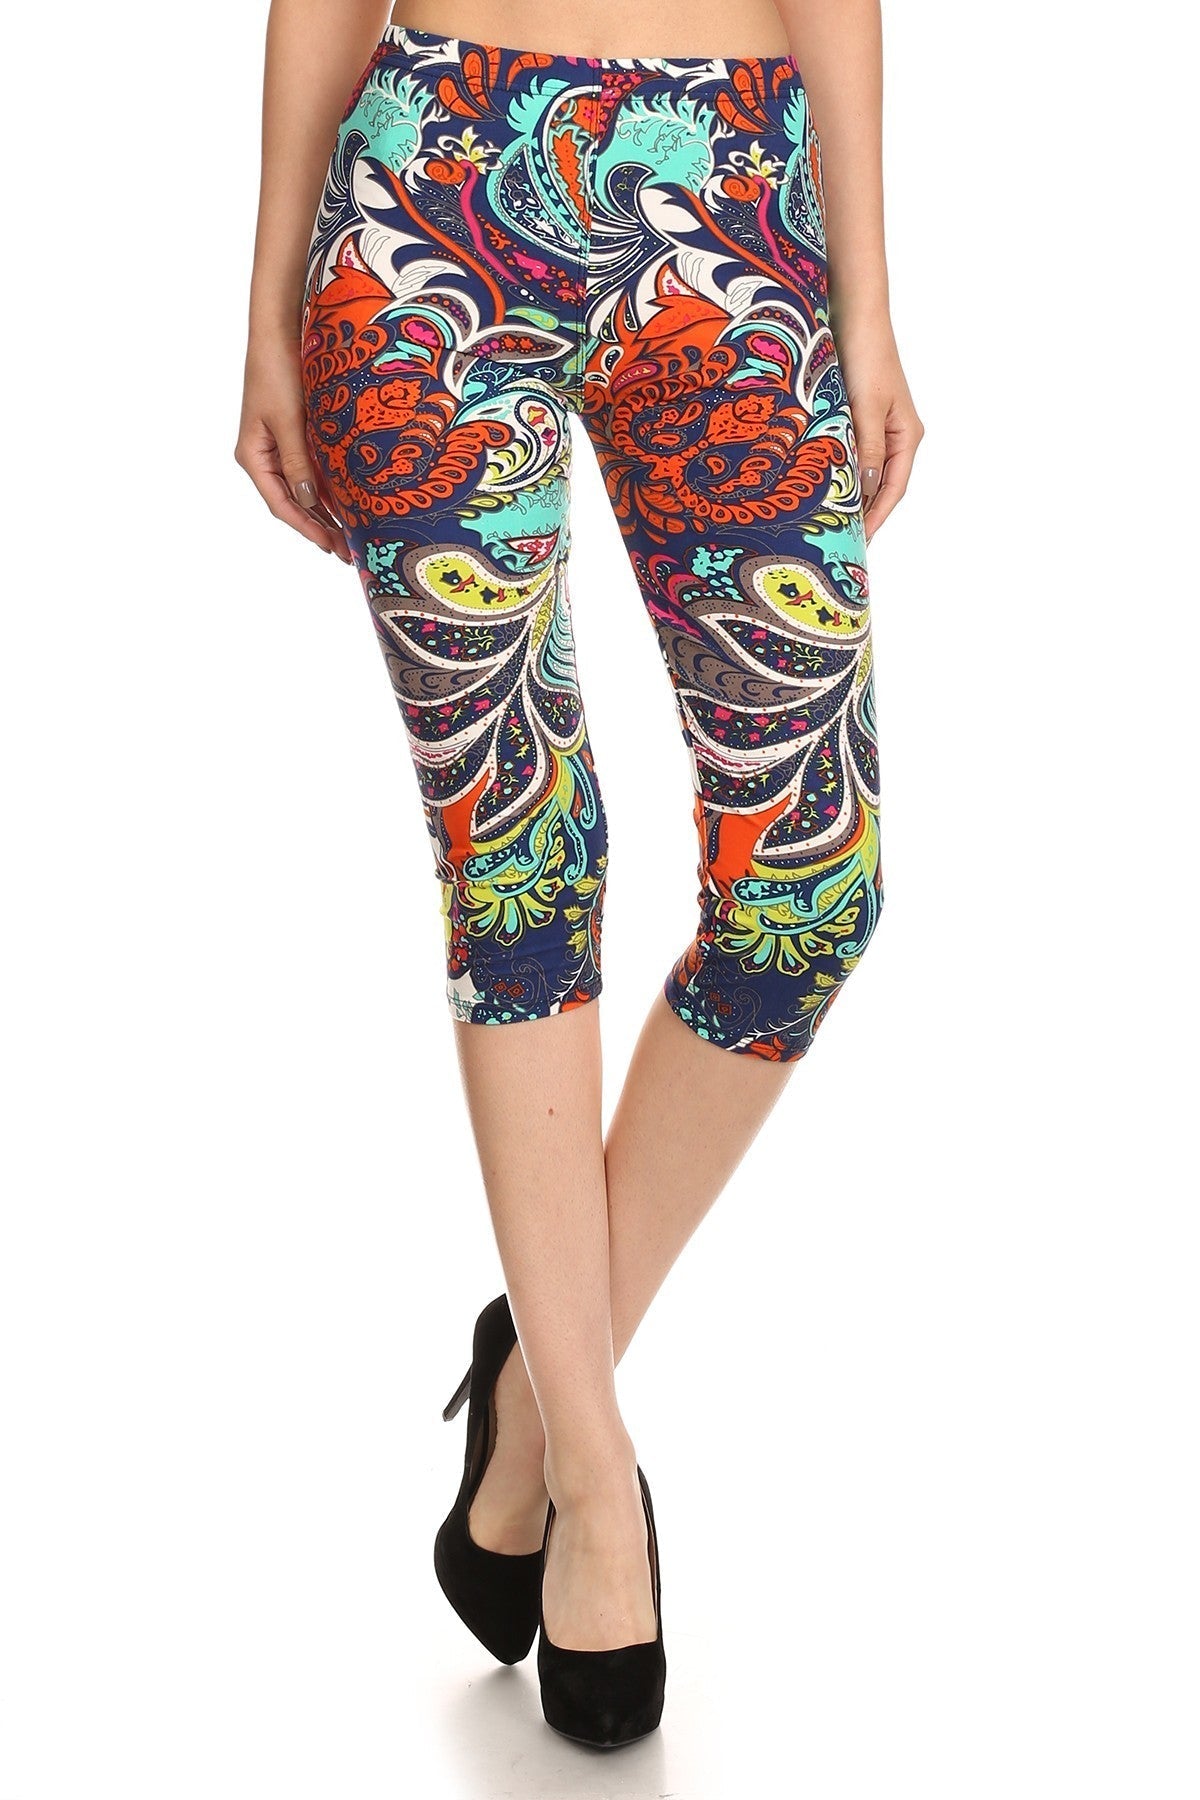 Multi-color Ornate Print Cropped Length Fitted Leggings With High Elastic Waist. Smile Sparker